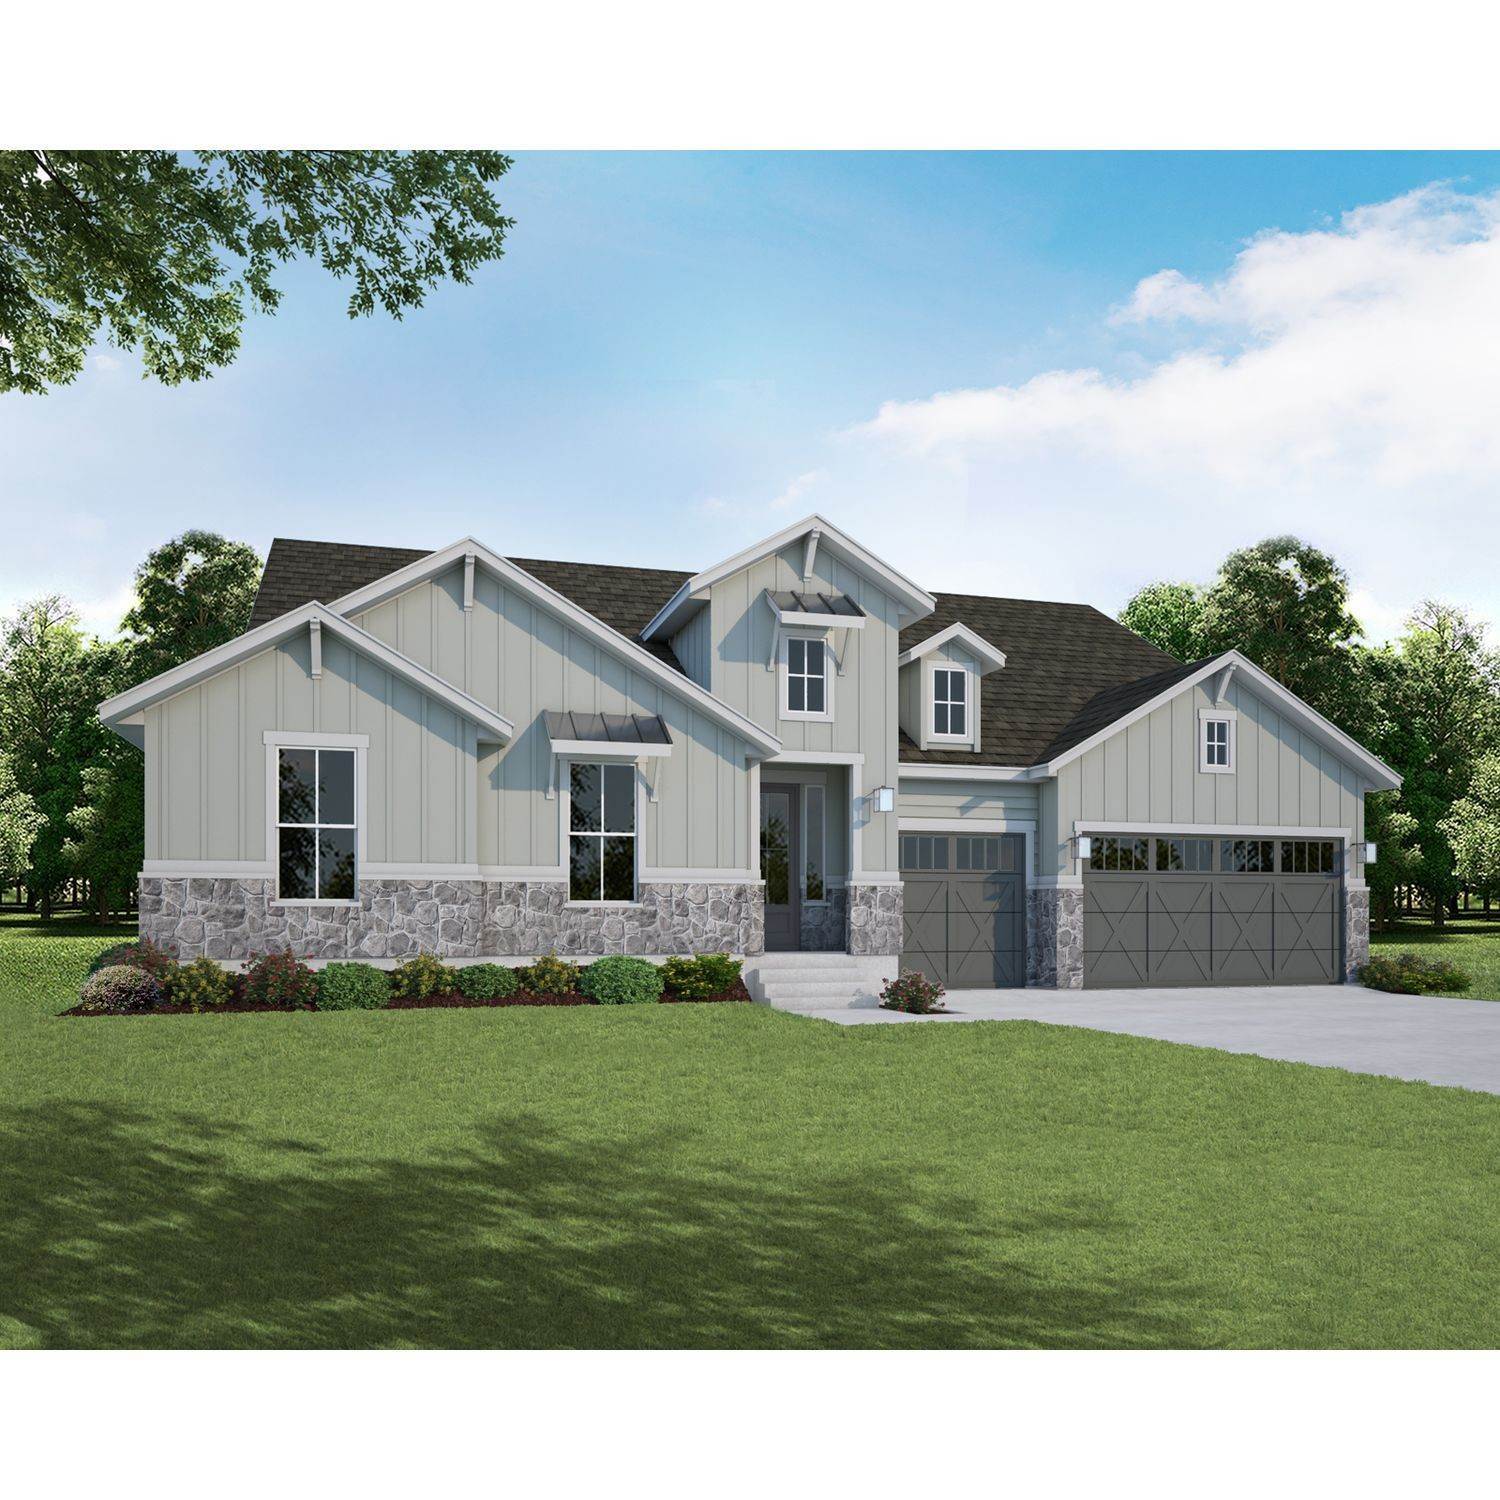 Single Family for Sale at Hilltop At Inspiration 75s- 55+ 8405 South Winnipeg Court, Aurora, CO 80016